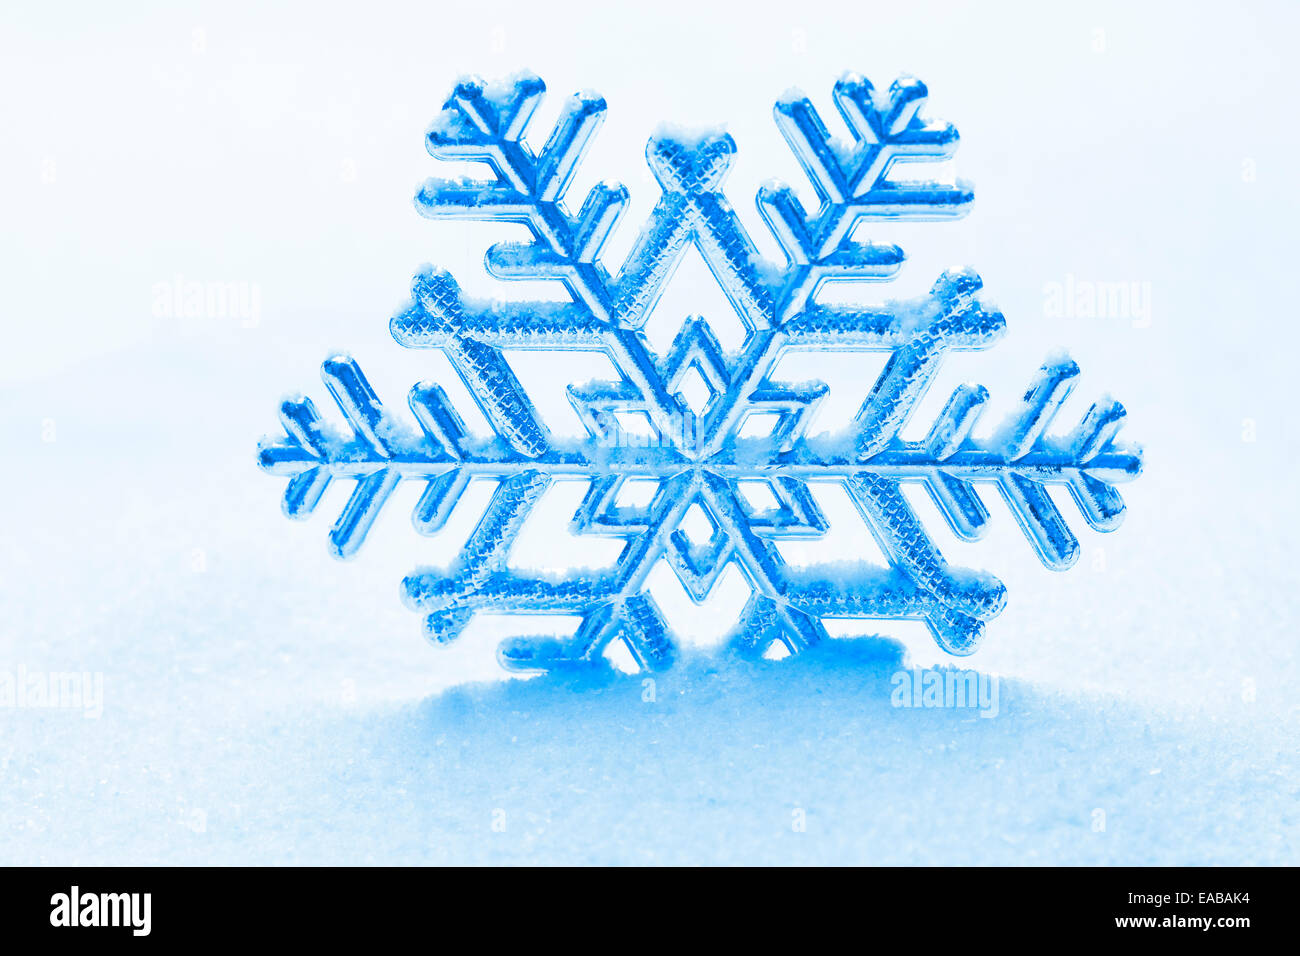 snowflake ornament against a background of snow Stock Photo